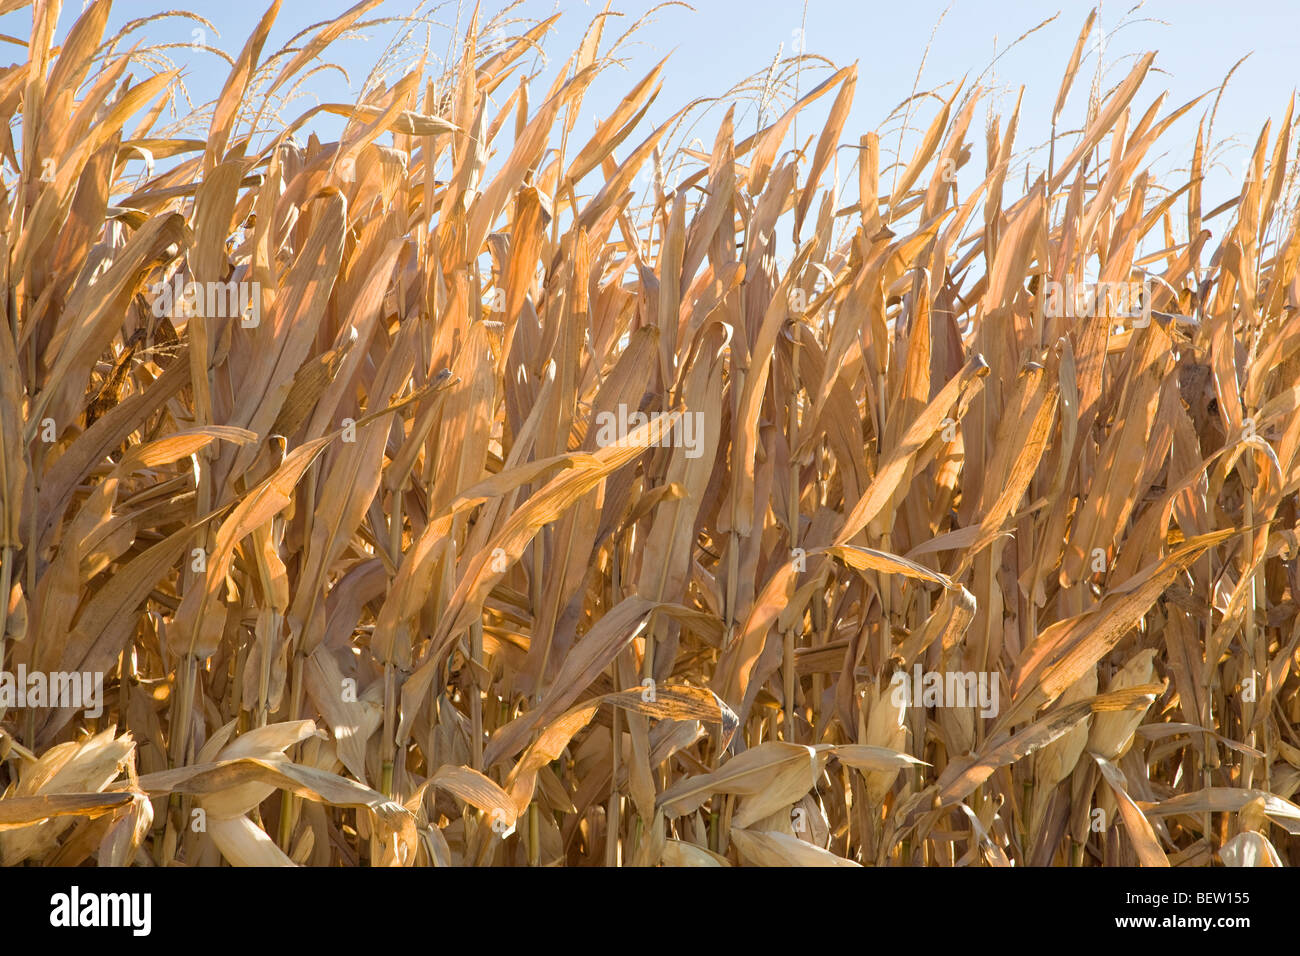 Dry corn stalks standing in field against a blue sky. Stock Photo